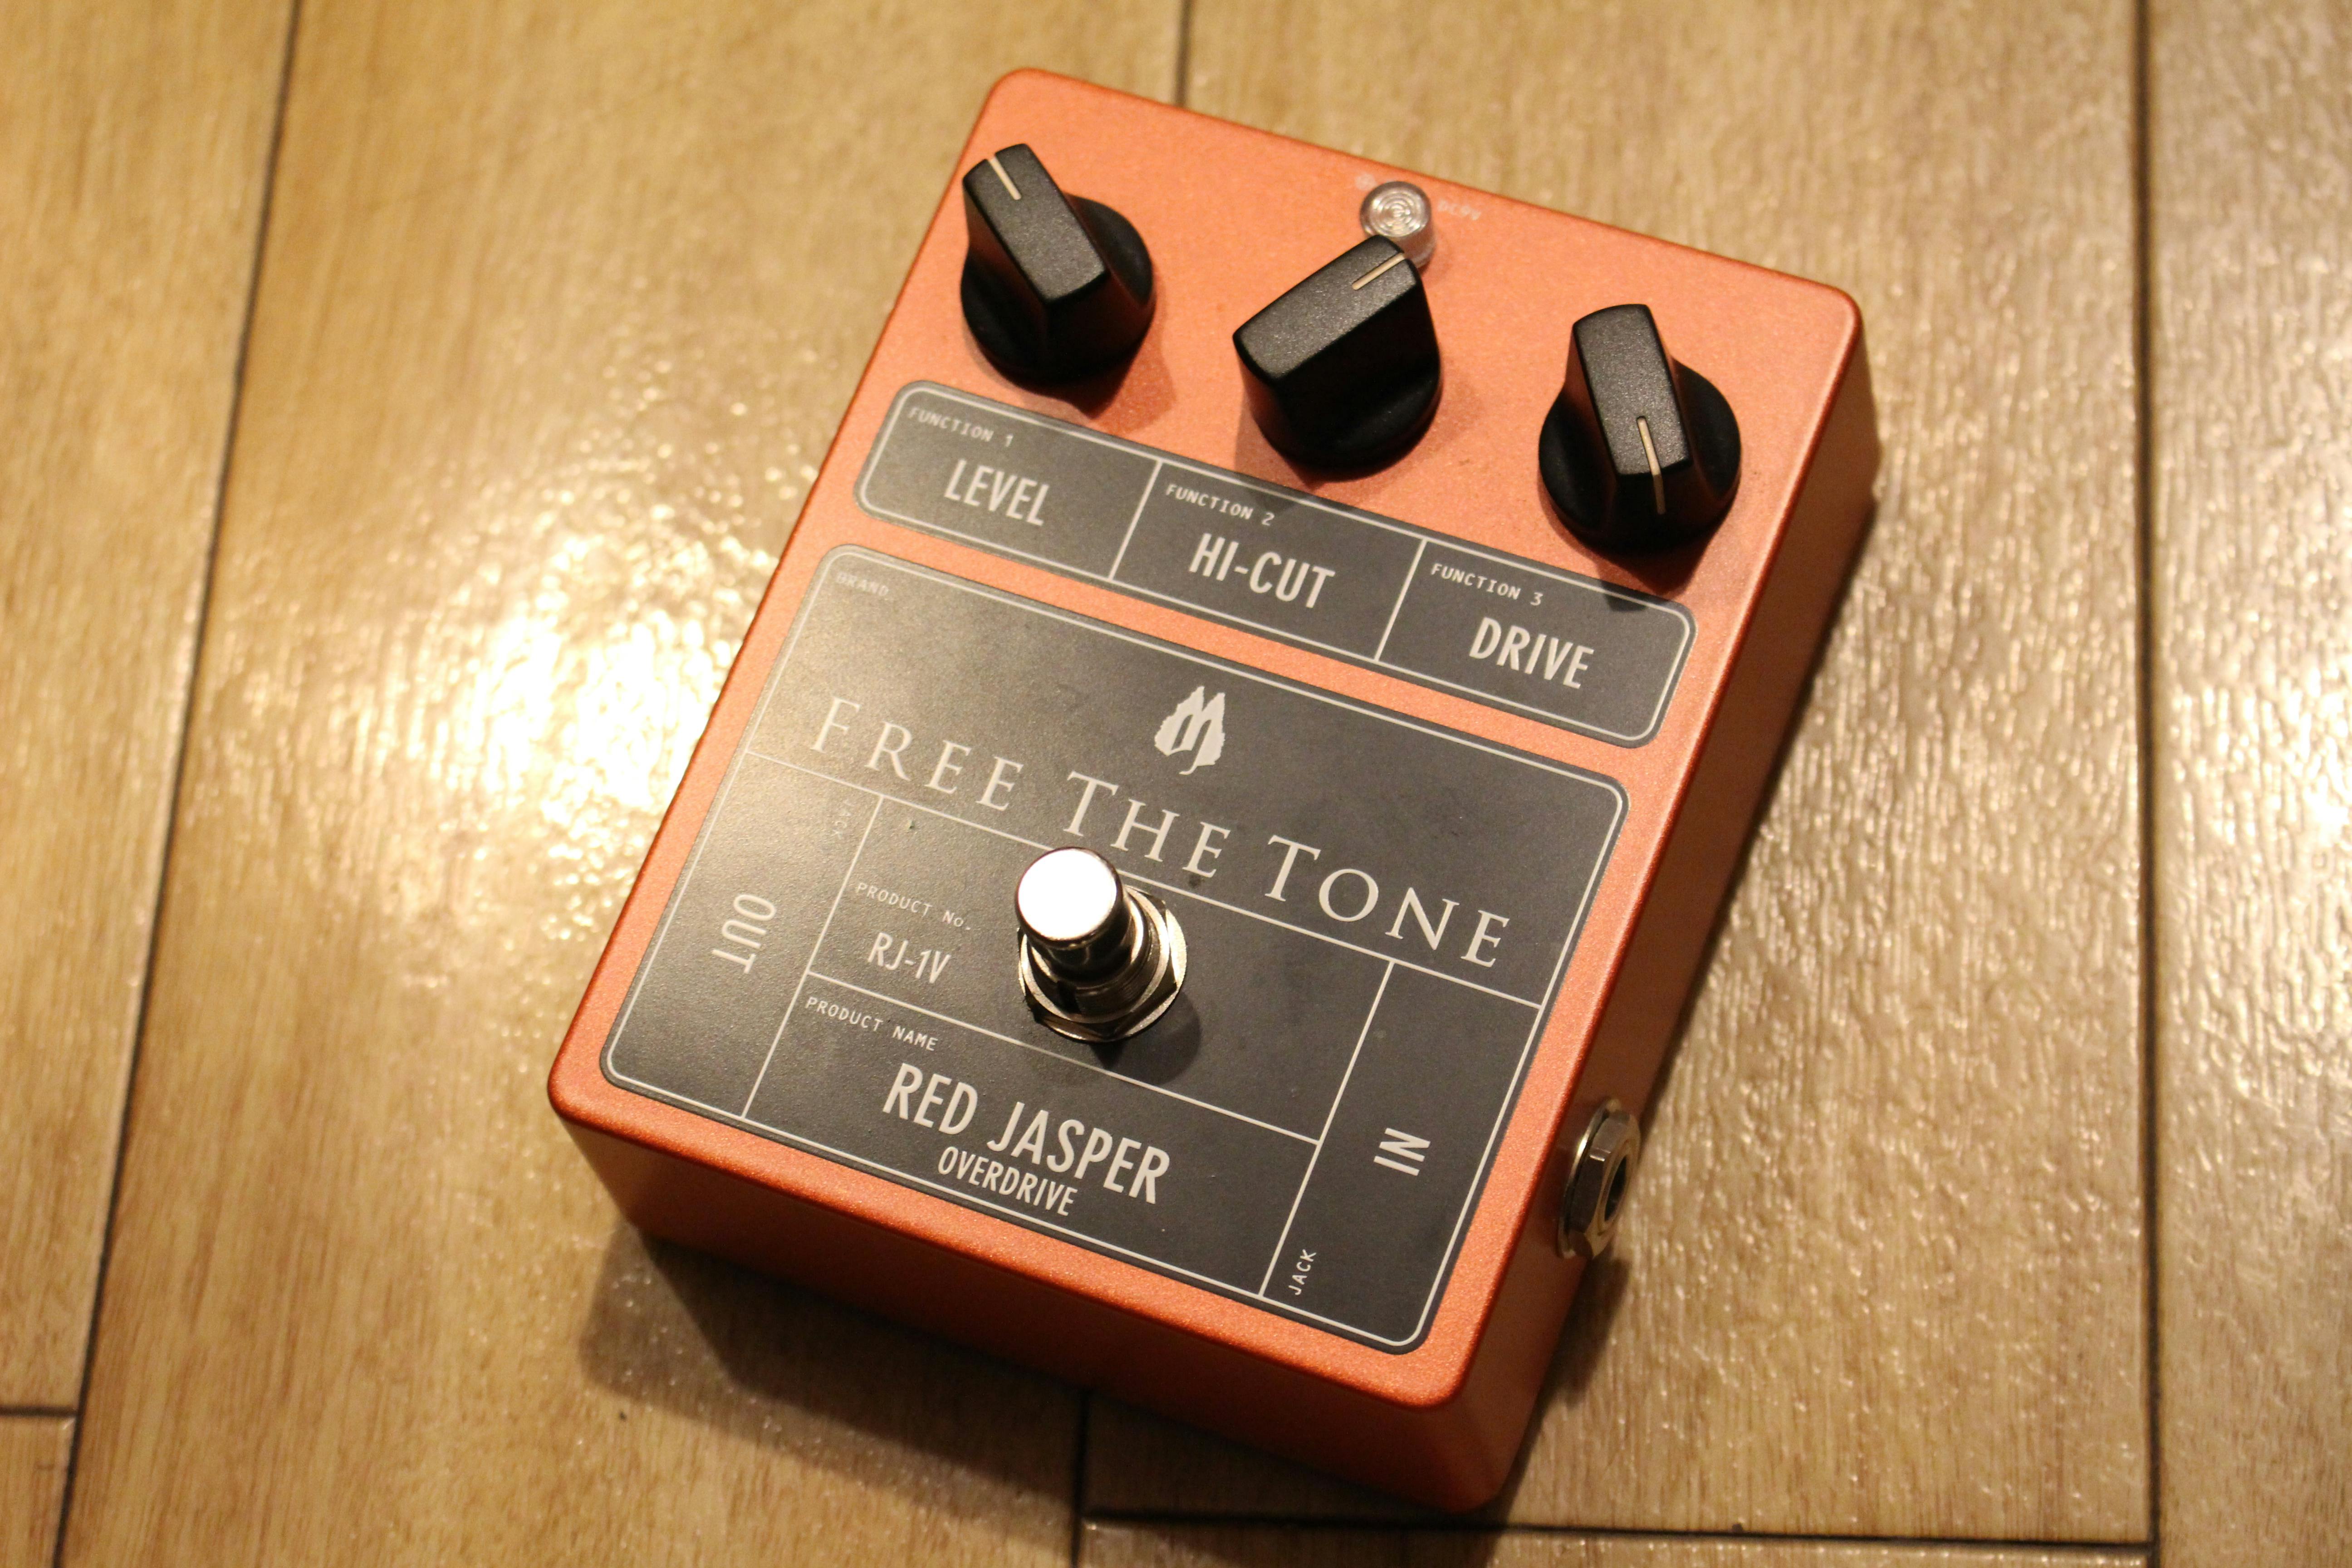 Second Hand Free The Tone Red Jasper BOXED - Andertons Music Co.